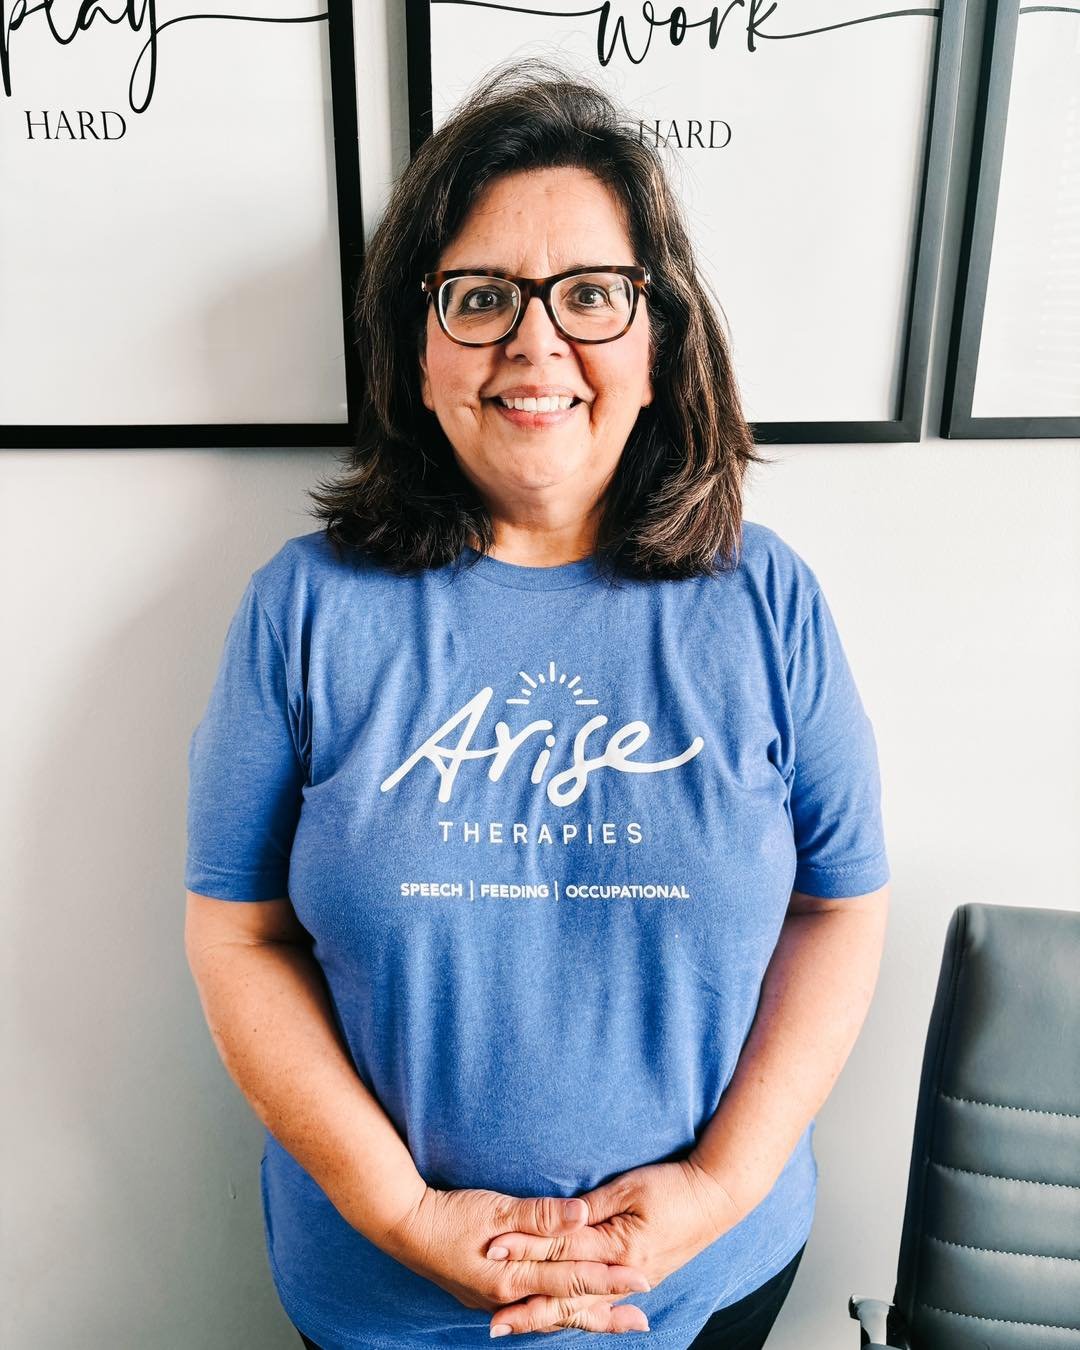 We want to welcome our newest OT here at Arise! Ms. Yolanda comes to us with years of experience and we are so excited to have her on the team! 💙Before we introduce her though, she has a fun fact, but YOU have to guess the answer. Ms. Yolanda is the